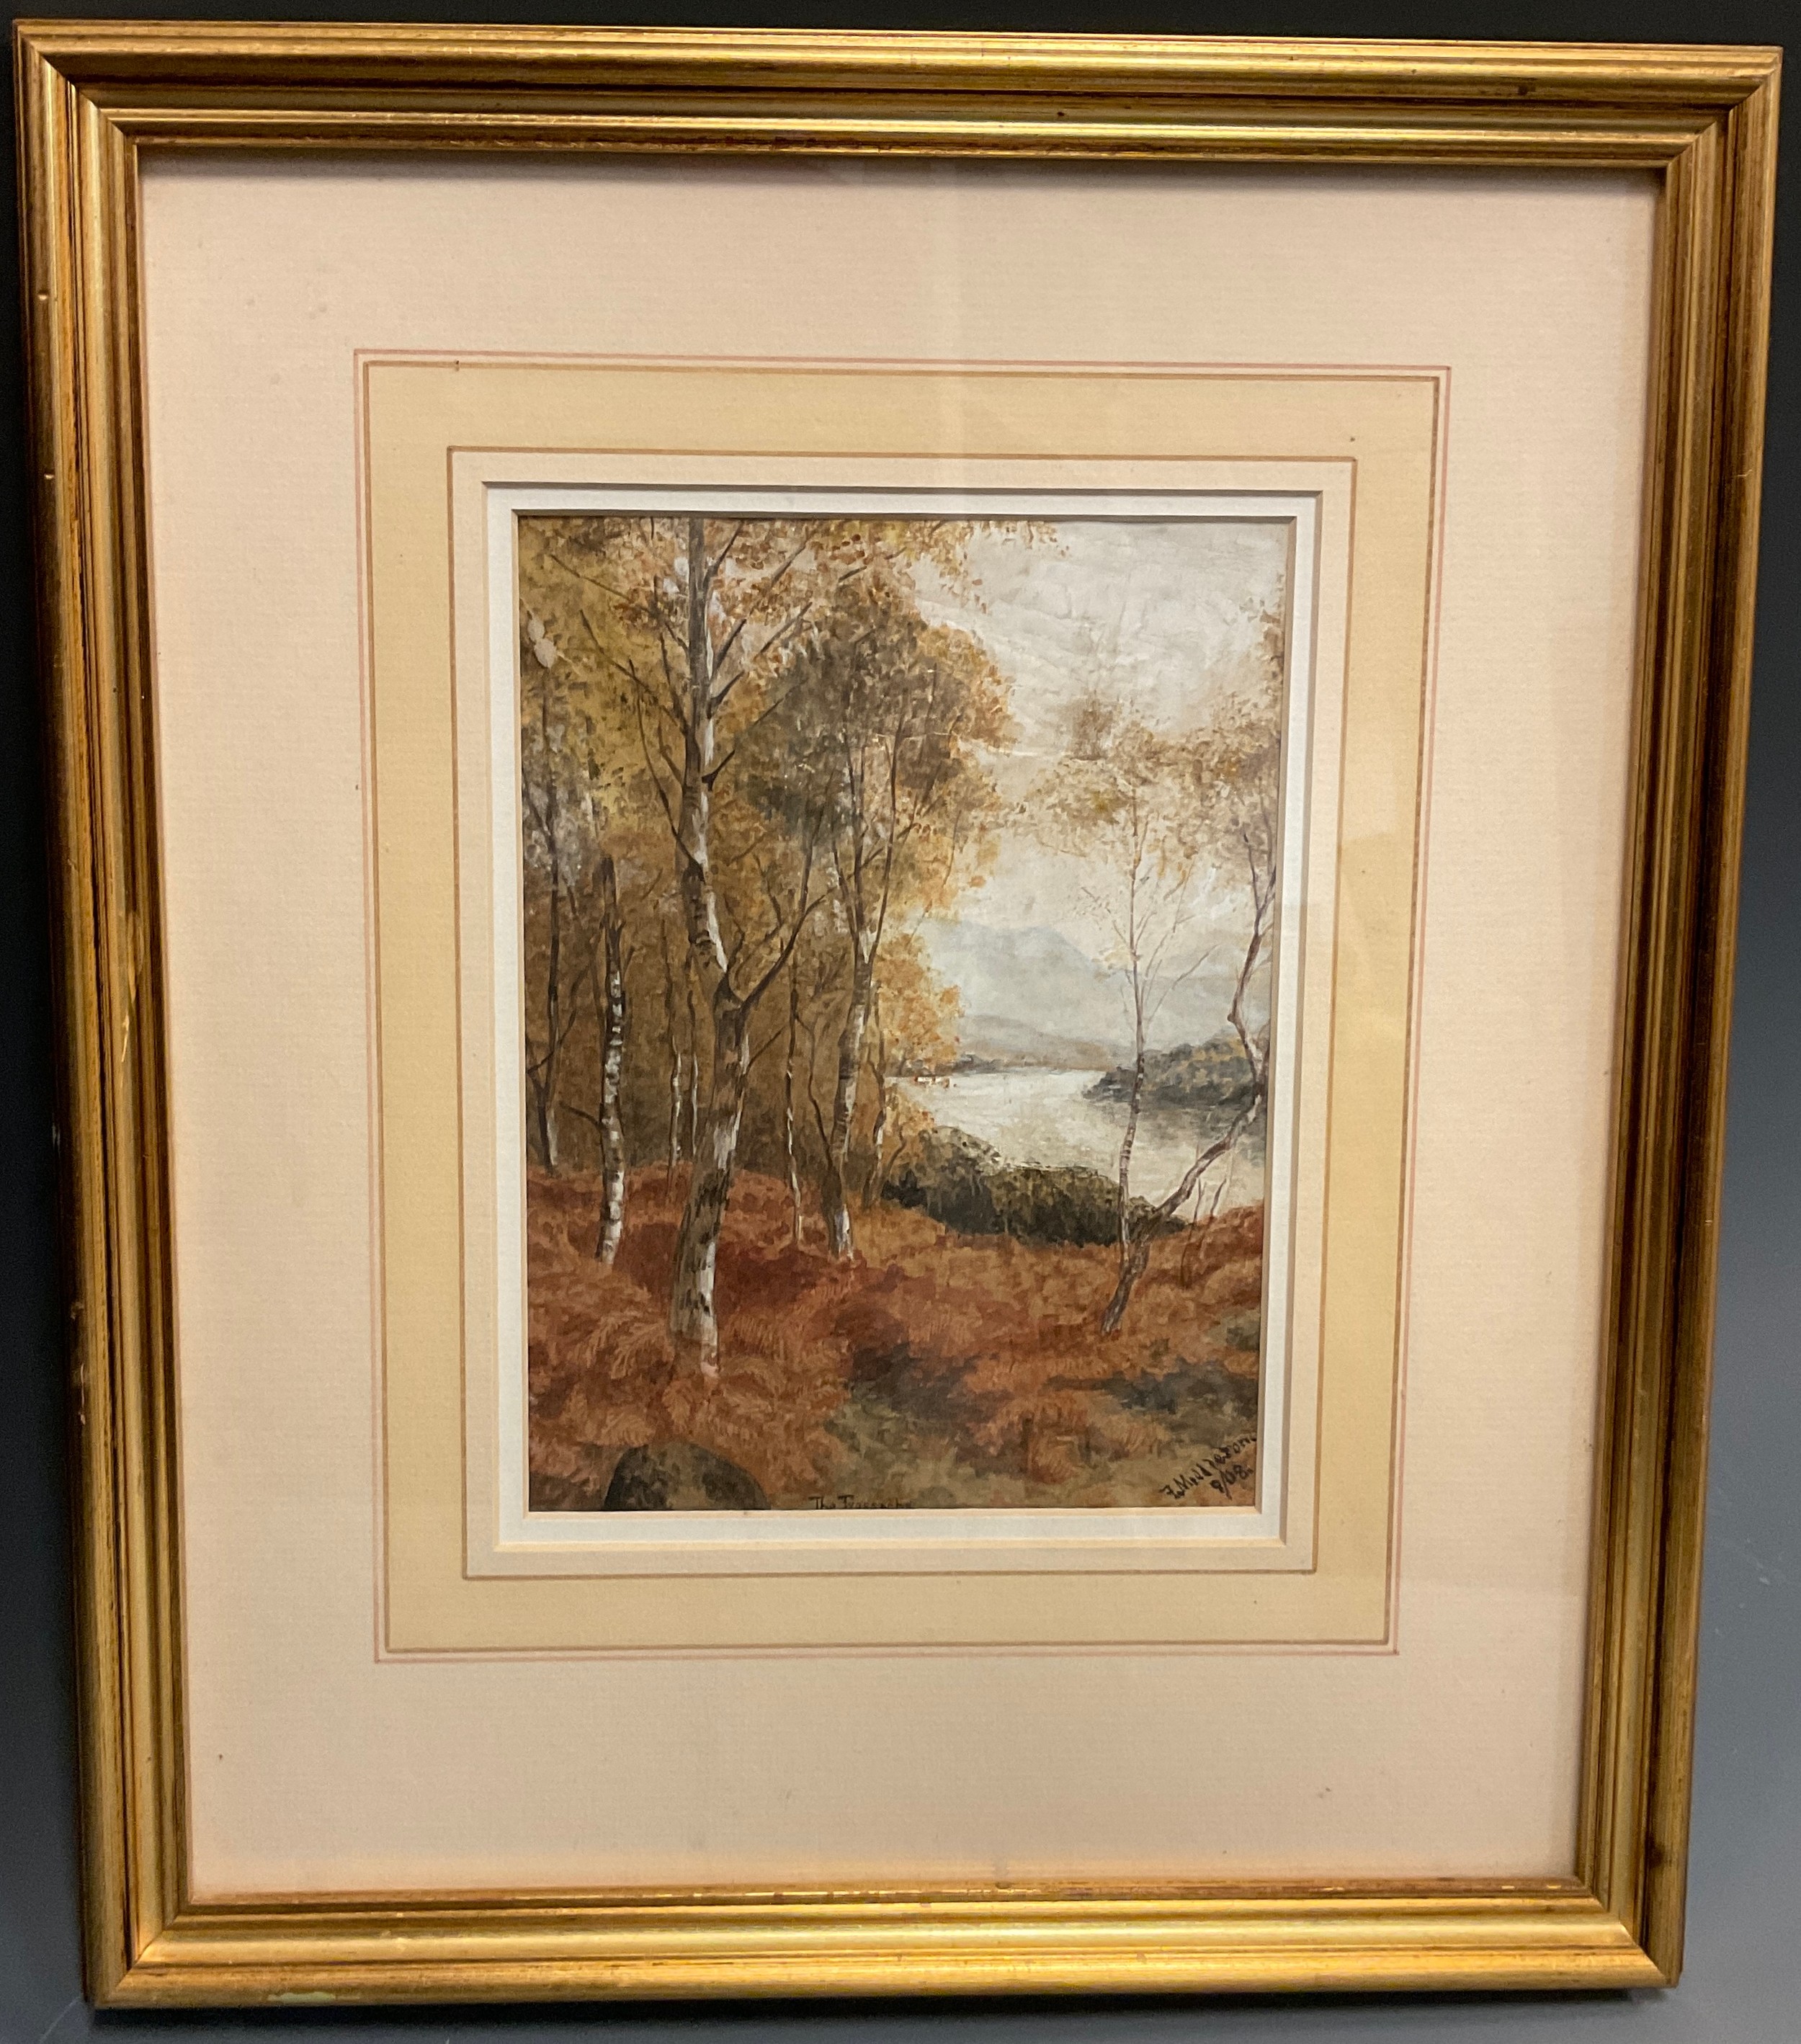 Frank Middleton, The Trossachs, signed, dated 1908, watercolour, 20cm x 15cm.